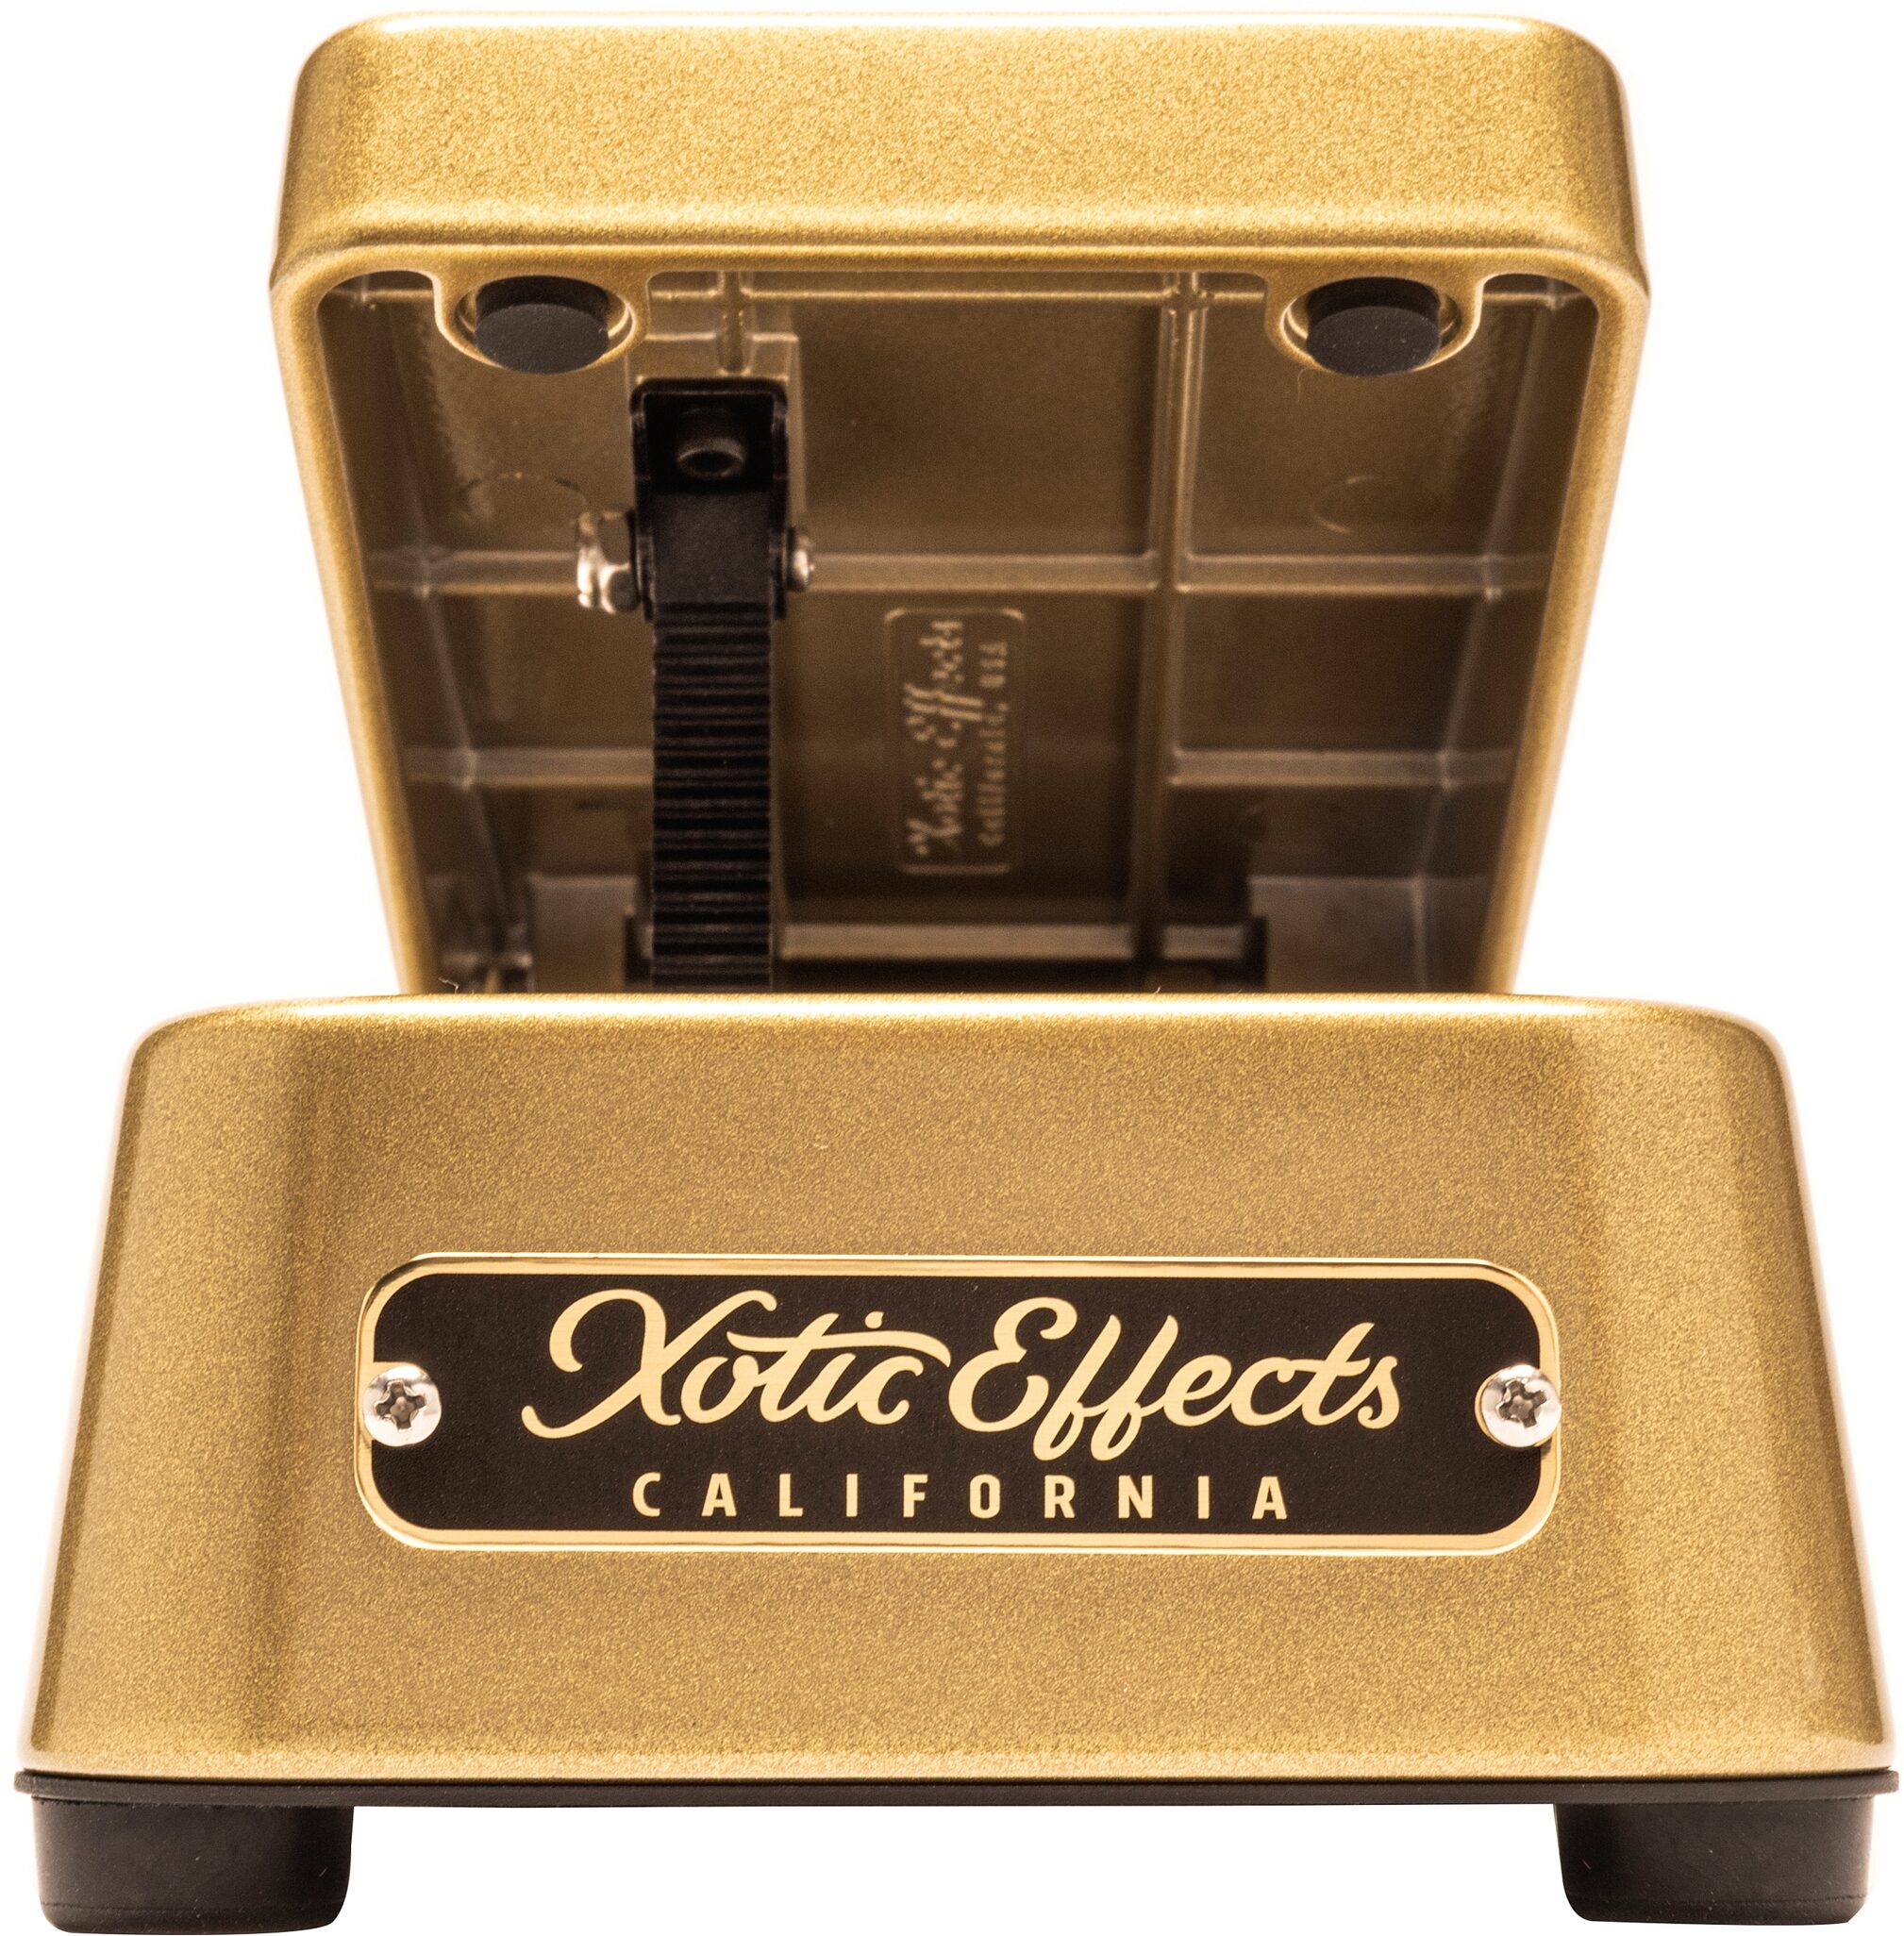 Xotic Xvp-250k Volume Pedal Haute Impedance - Wah & filter effect pedal - Variation 2